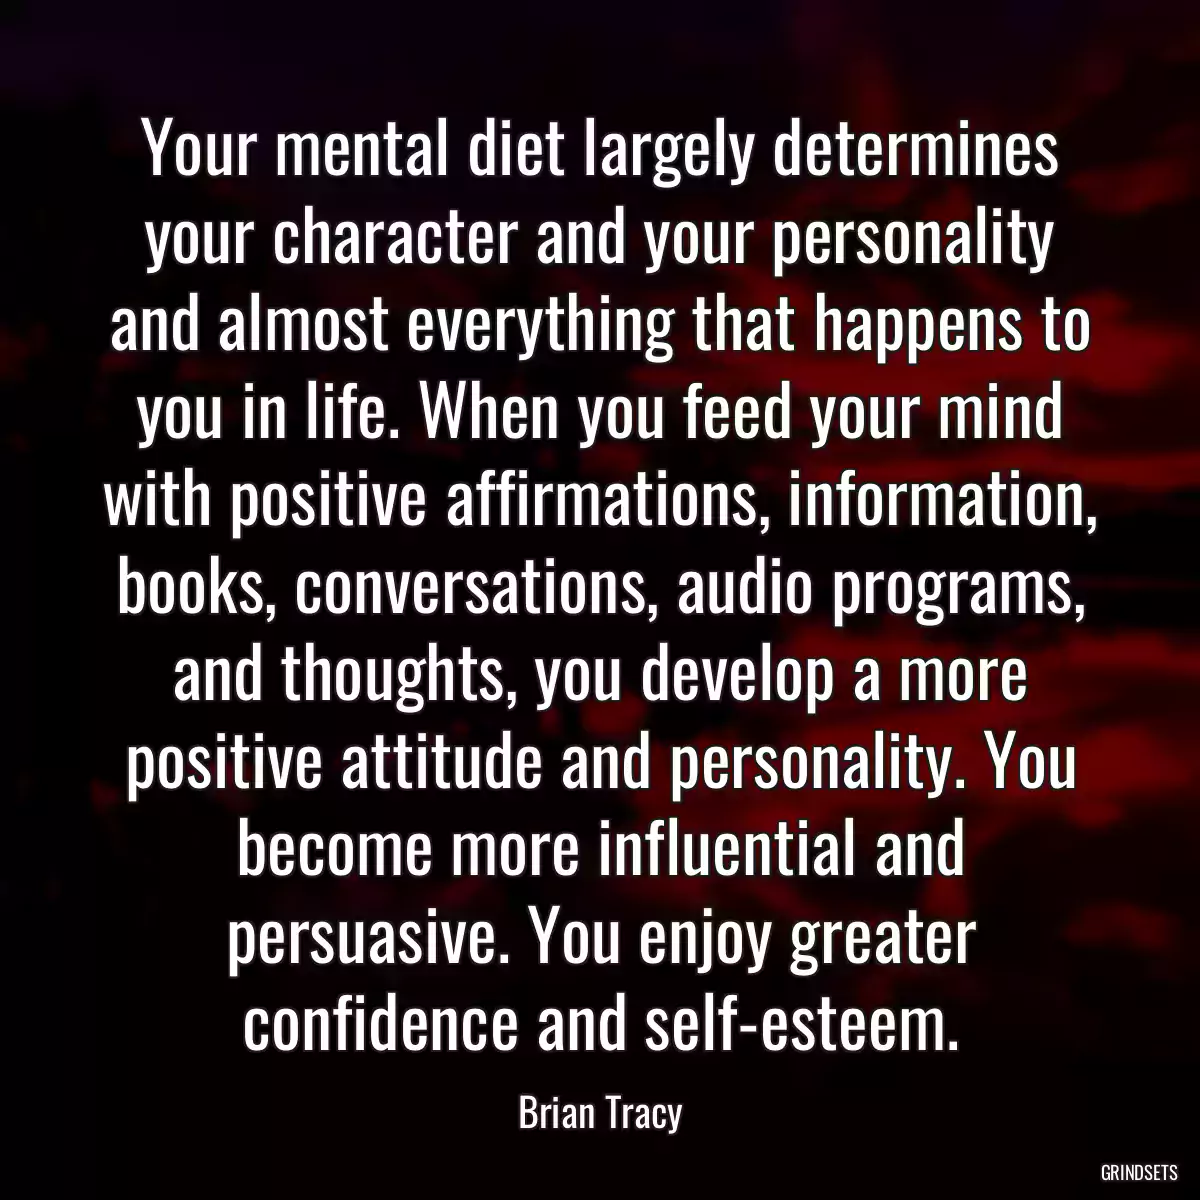 Your mental diet largely determines your character and your personality and almost everything that happens to you in life. When you feed your mind with positive affirmations, information, books, conversations, audio programs, and thoughts, you develop a more positive attitude and personality. You become more influential and persuasive. You enjoy greater confidence and self-esteem.